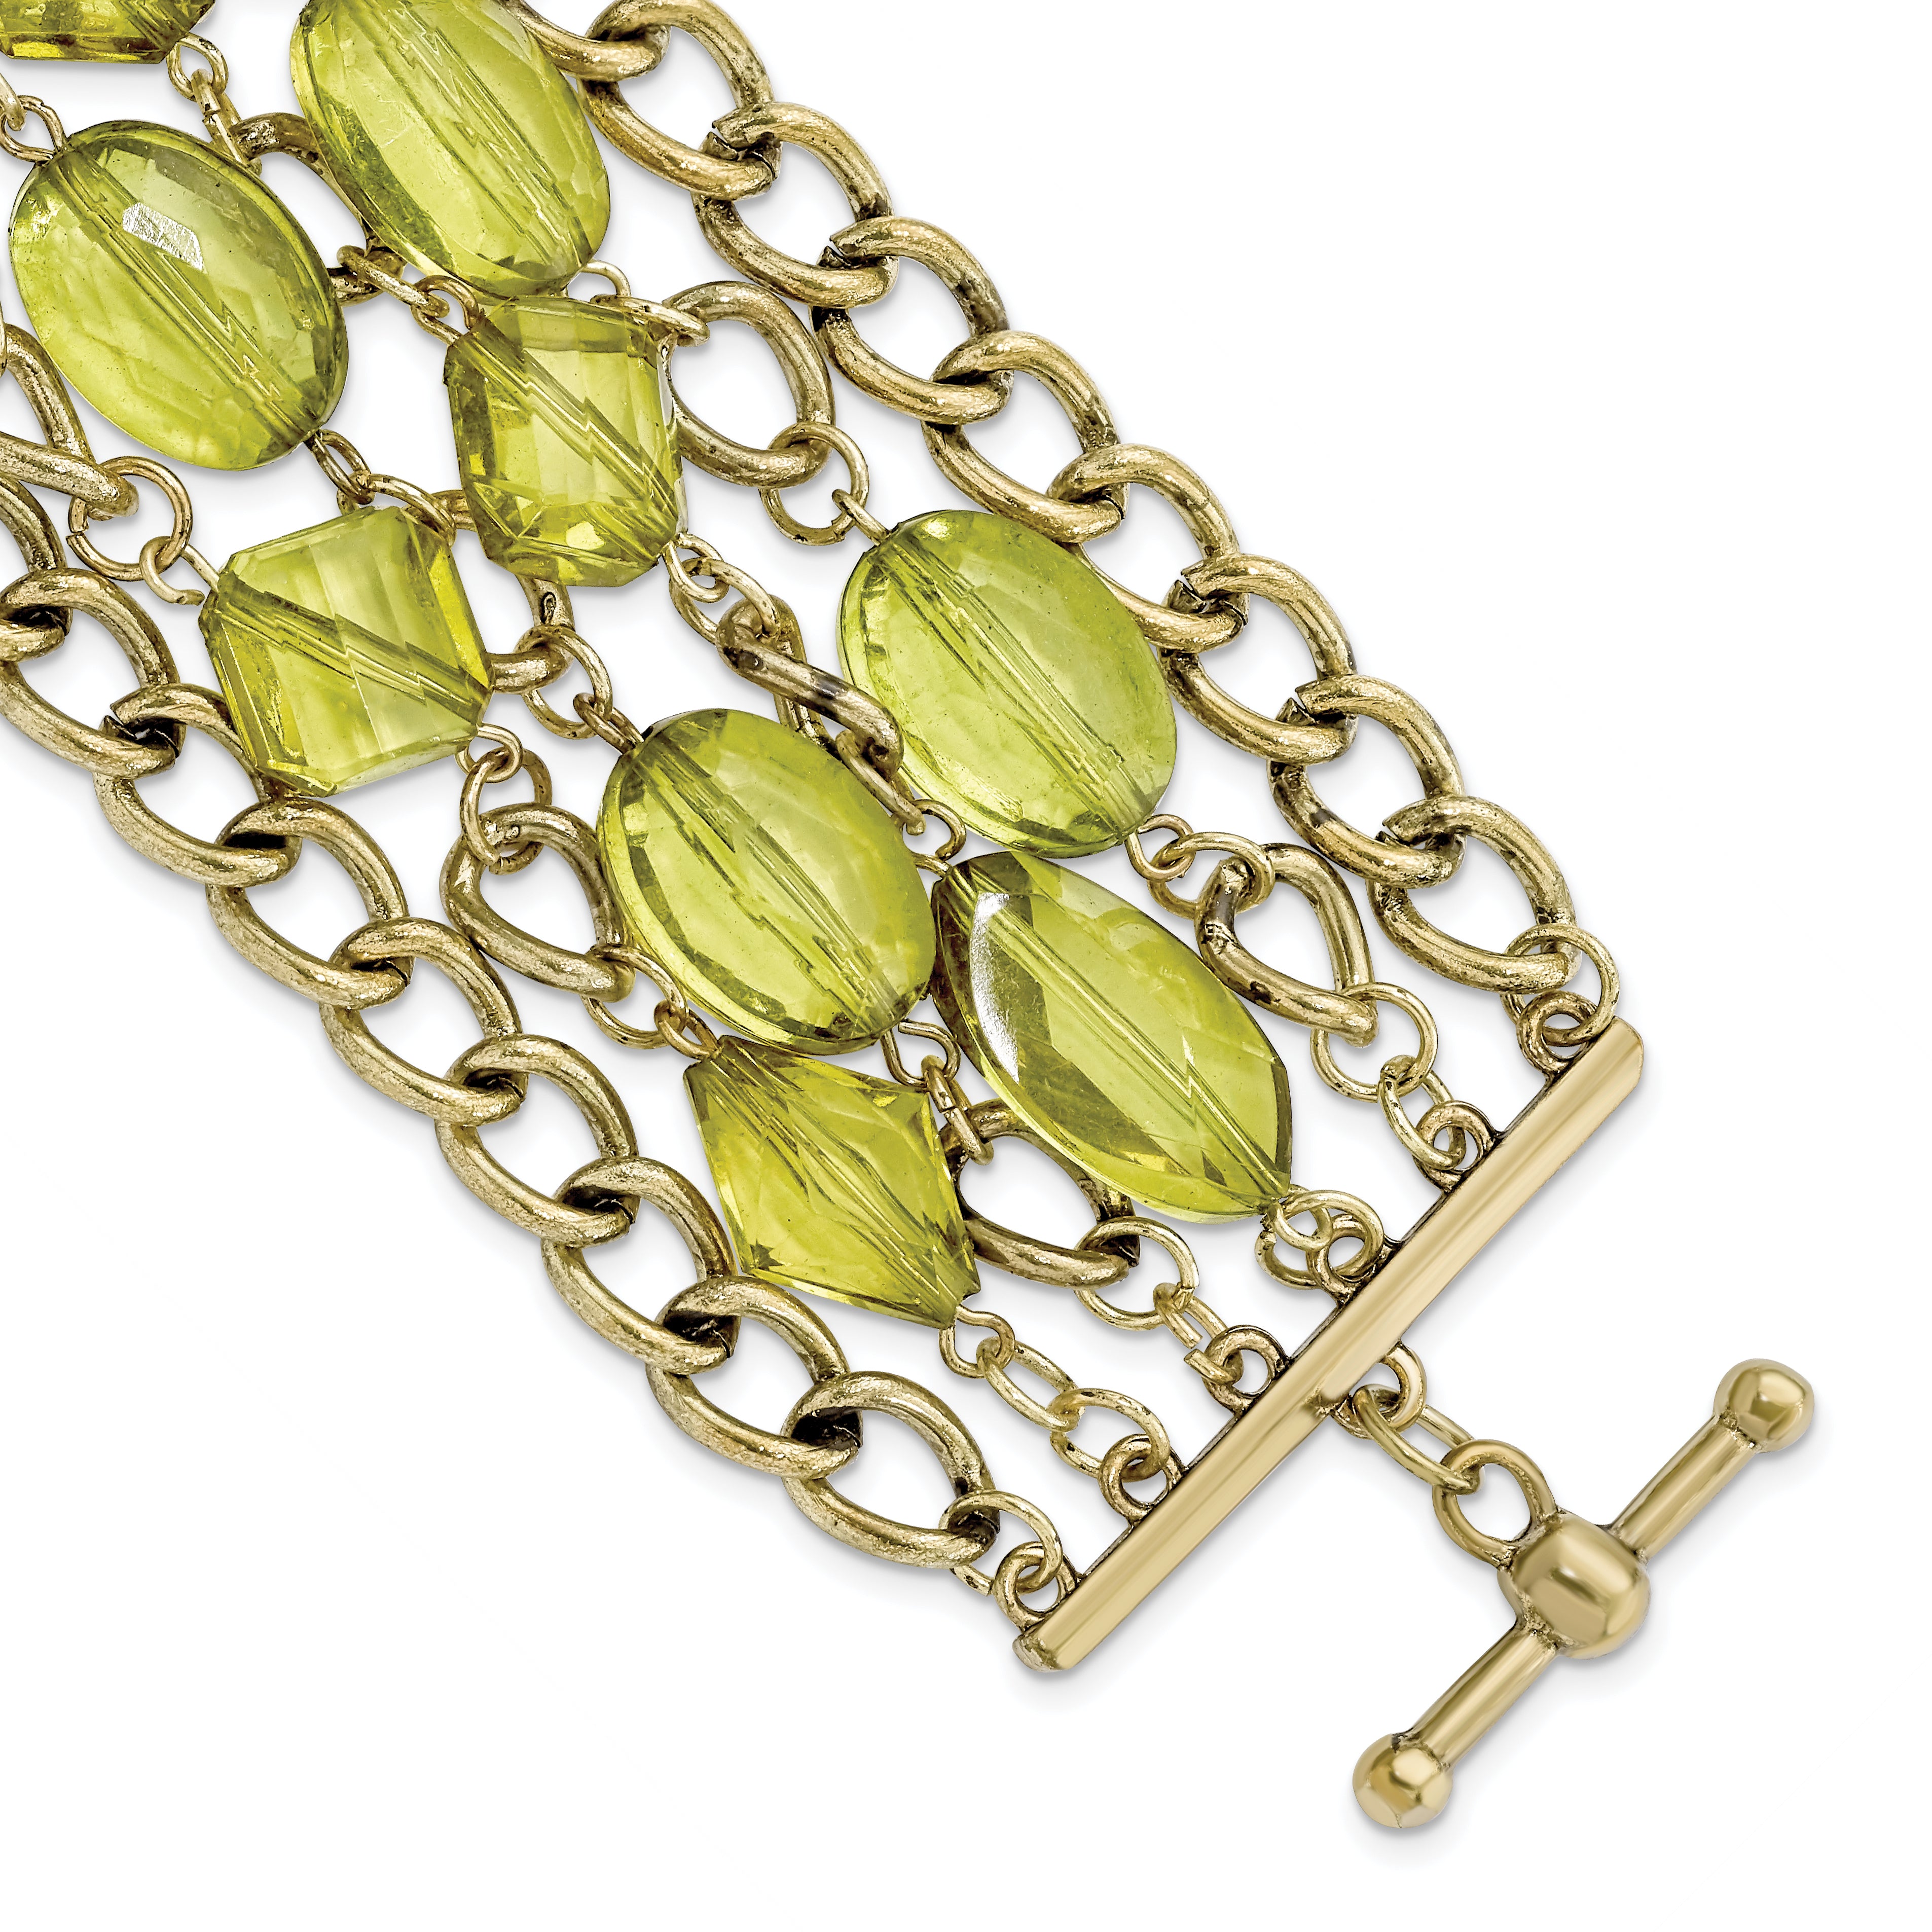 1928 Jewelry Brass-tone Link and Olive Green Faceted Acrylic Beads Wide Six Row 8 inch Toggle Bracelet